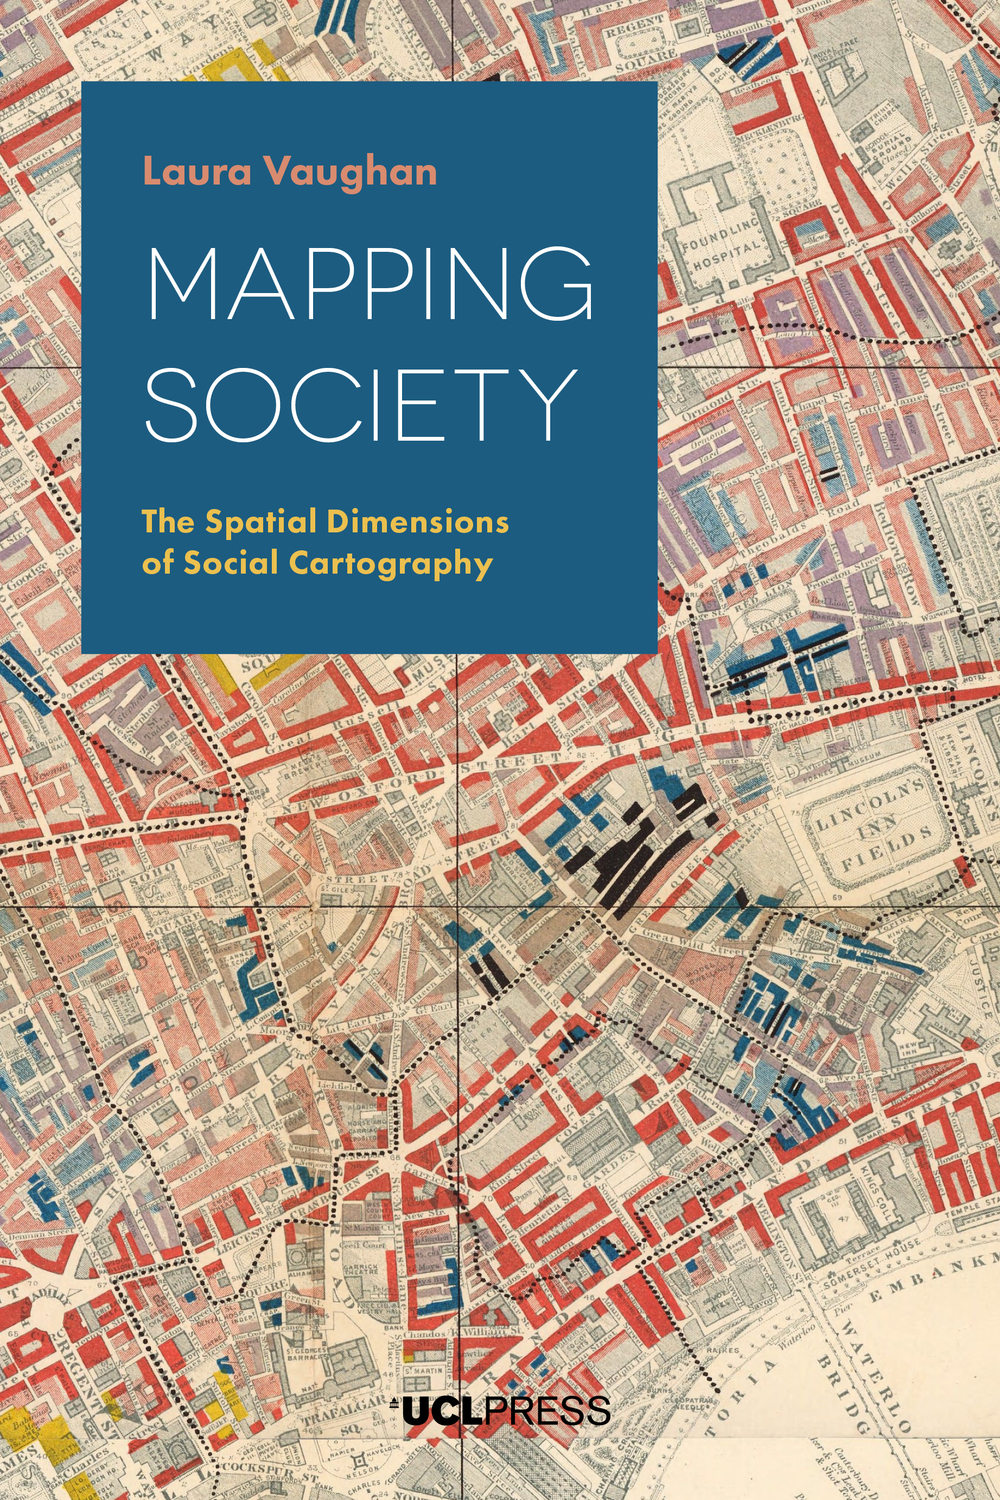 Image Mapping society : the spatial dimensions of social cartography